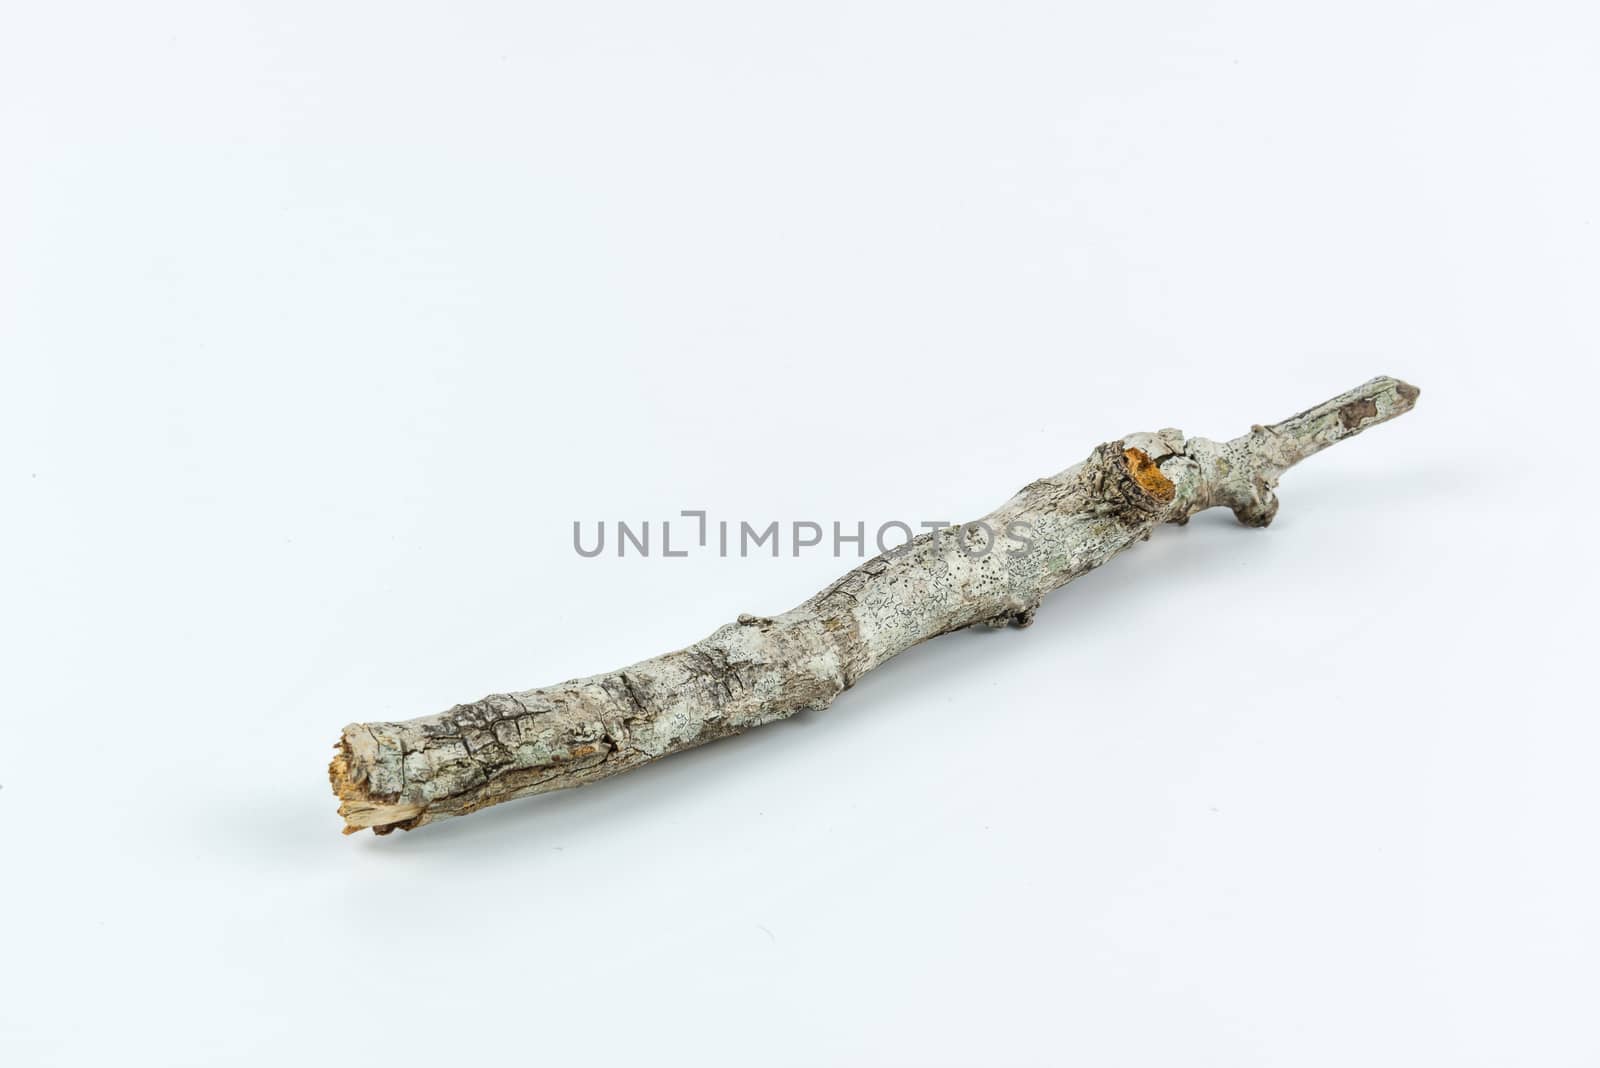 Pile of dry twigs on white background by YingTanthawarak